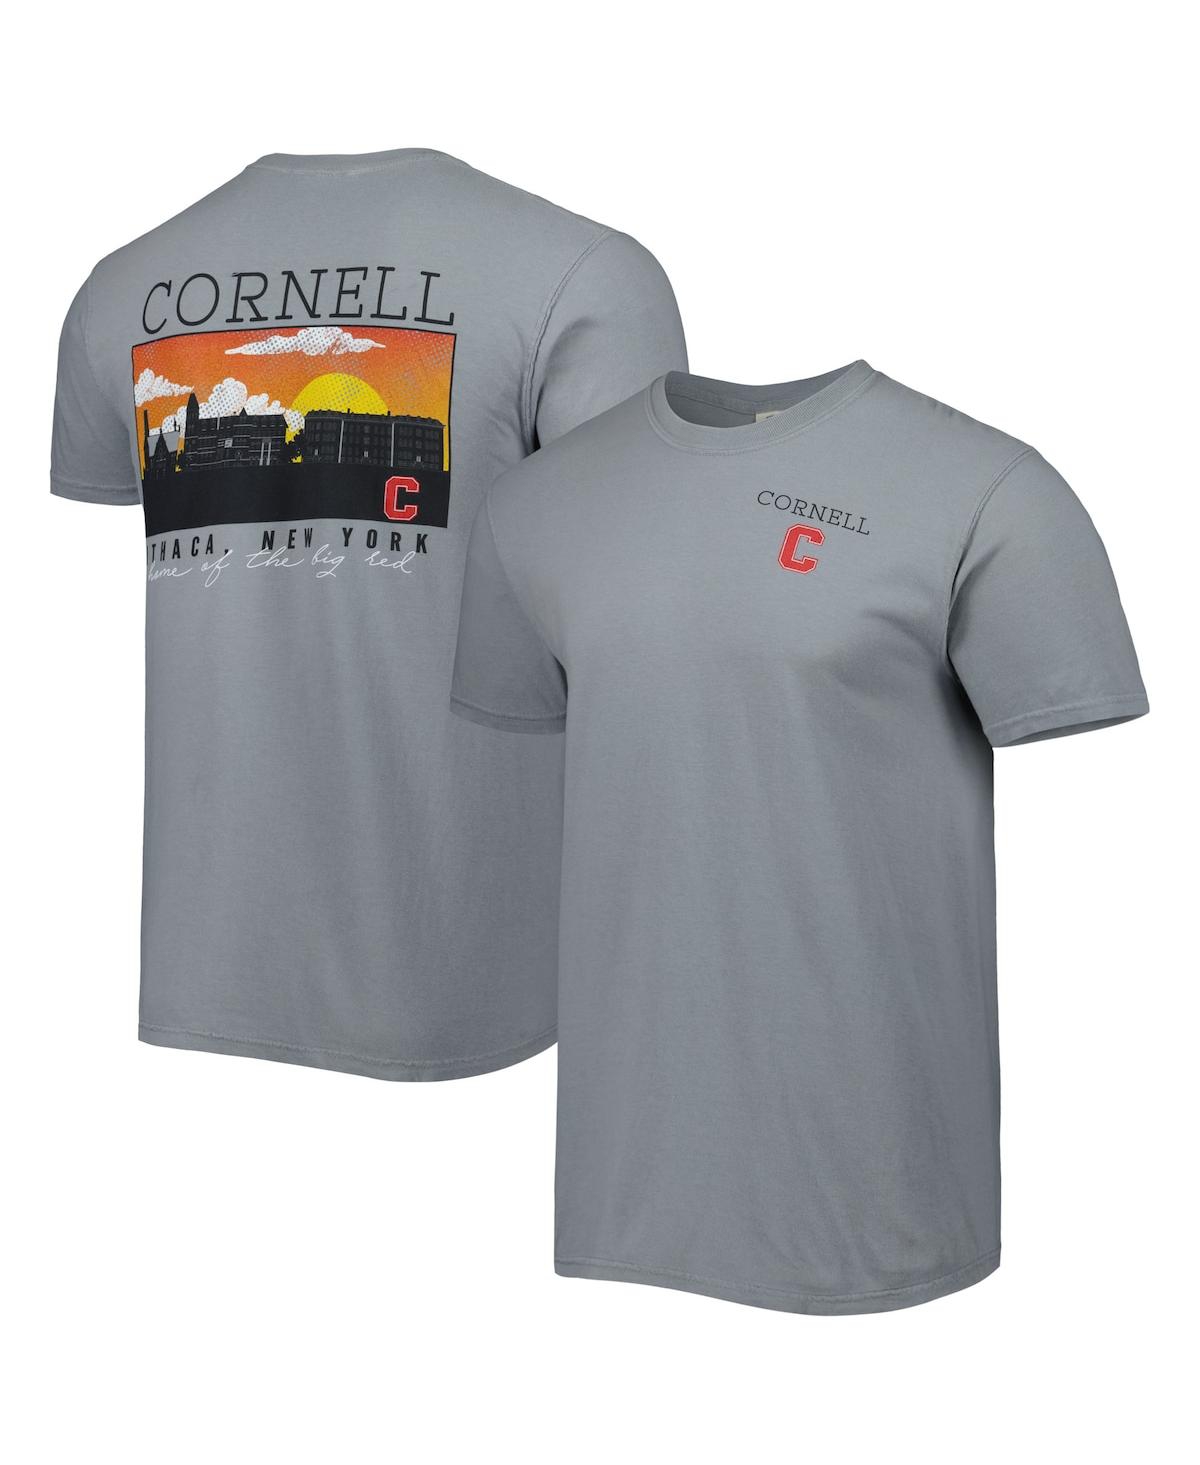 IMAGE ONE MEN'S GRAY CORNELL BIG RED CAMPUS SCENERY COMFORT COLOR T-SHIRT